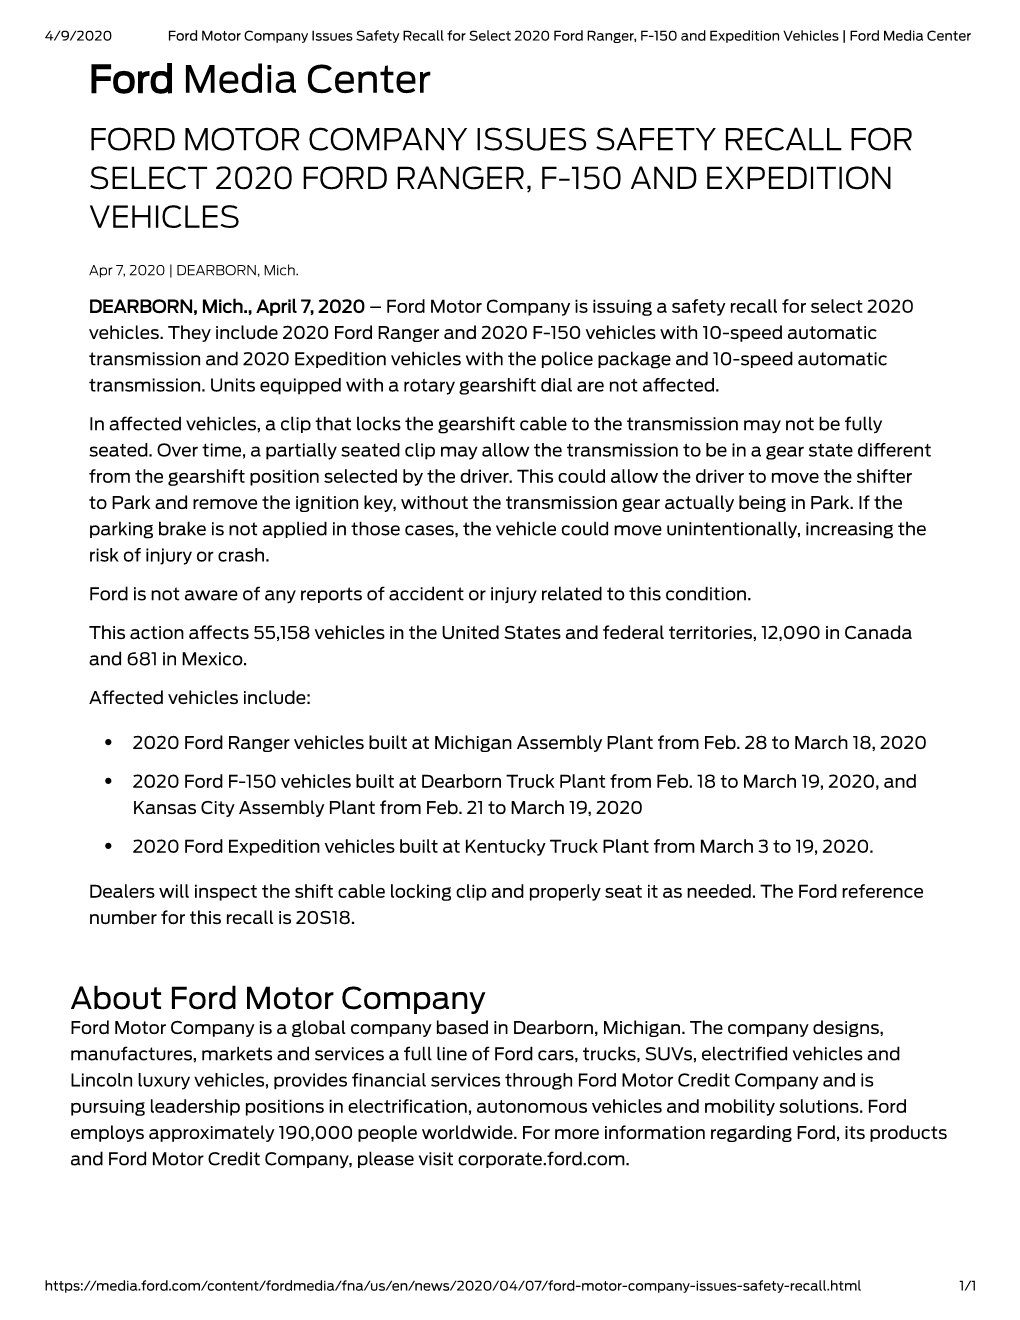 Ford Media Center Ford Media Center FORD MOTOR COMPANY ISSUES SAFETY RECALL for SELECT 2020 FORD RANGER, F-150 and EXPEDITION VEHICLES